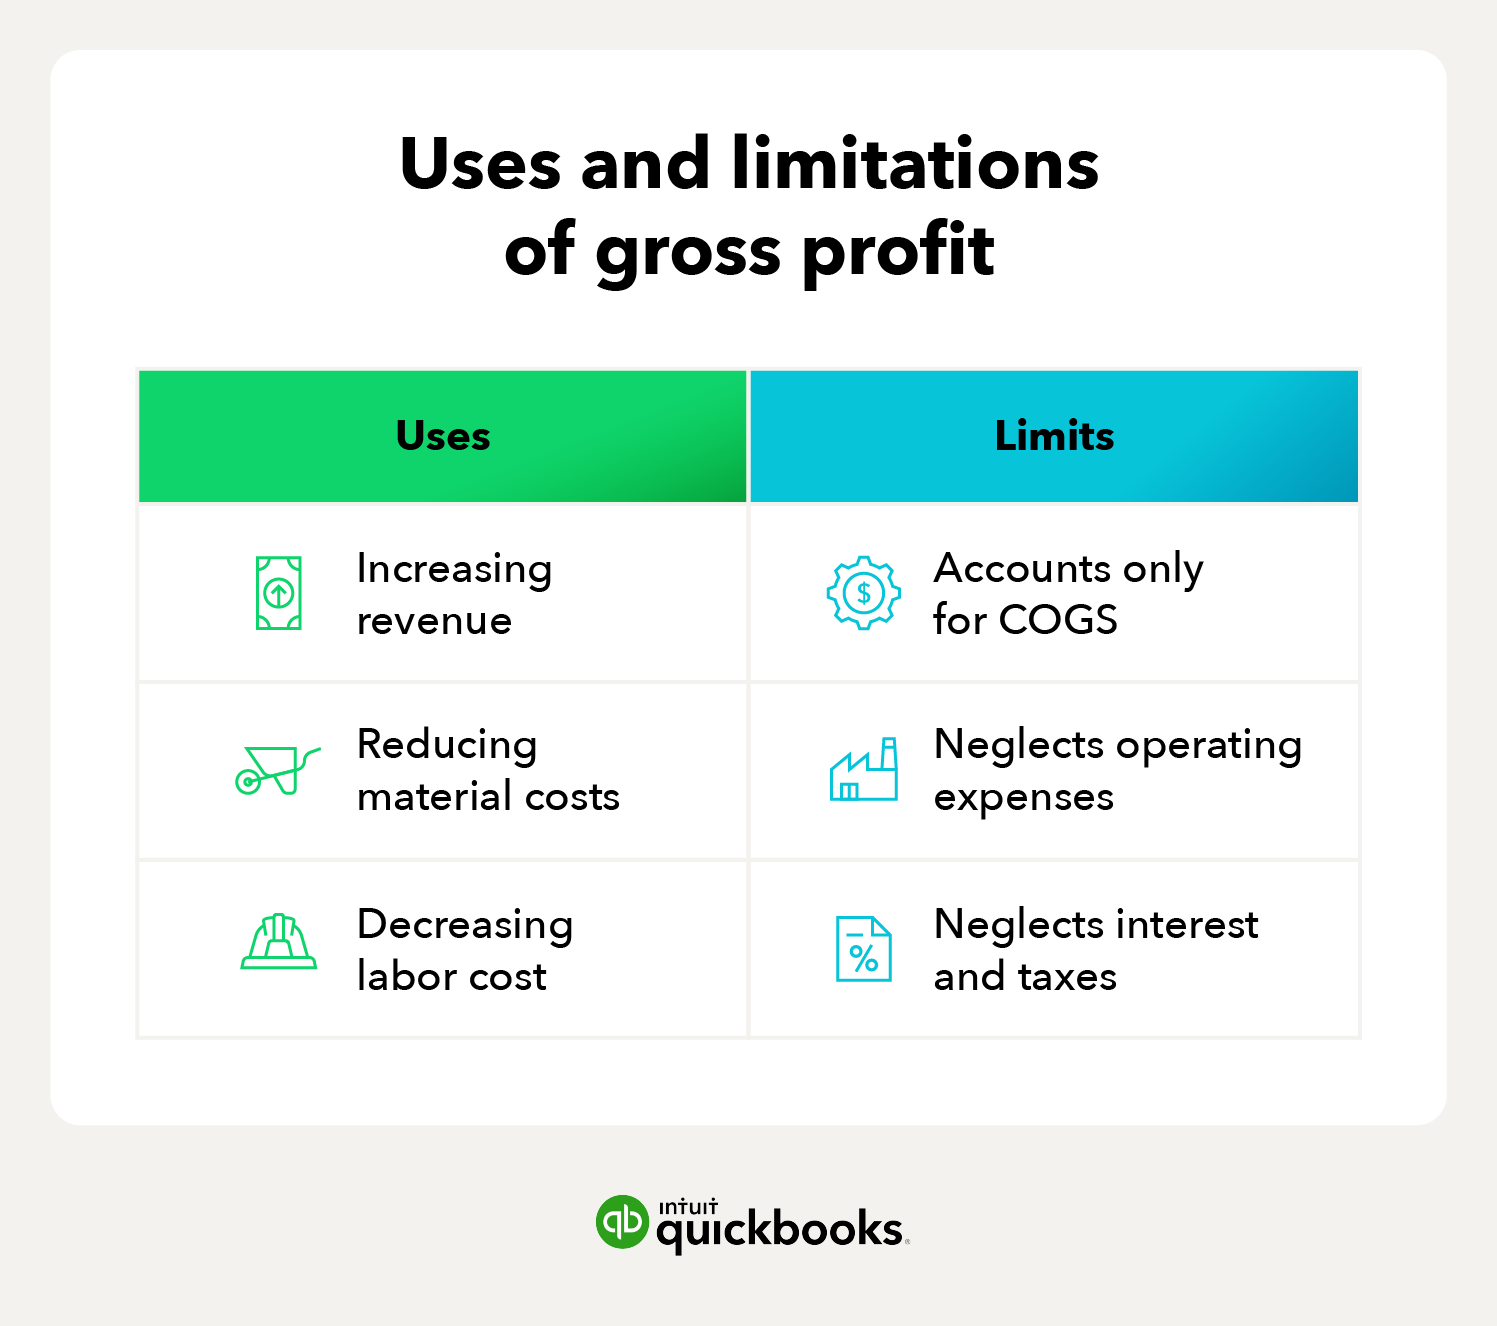 Uses and limits of gross profit:  Uses: Increasing revenue, reducing material cost, and decreasing labor costs  Limits: Accounts only for COGS, neglects operating expenses, and neglects interest, and taxes